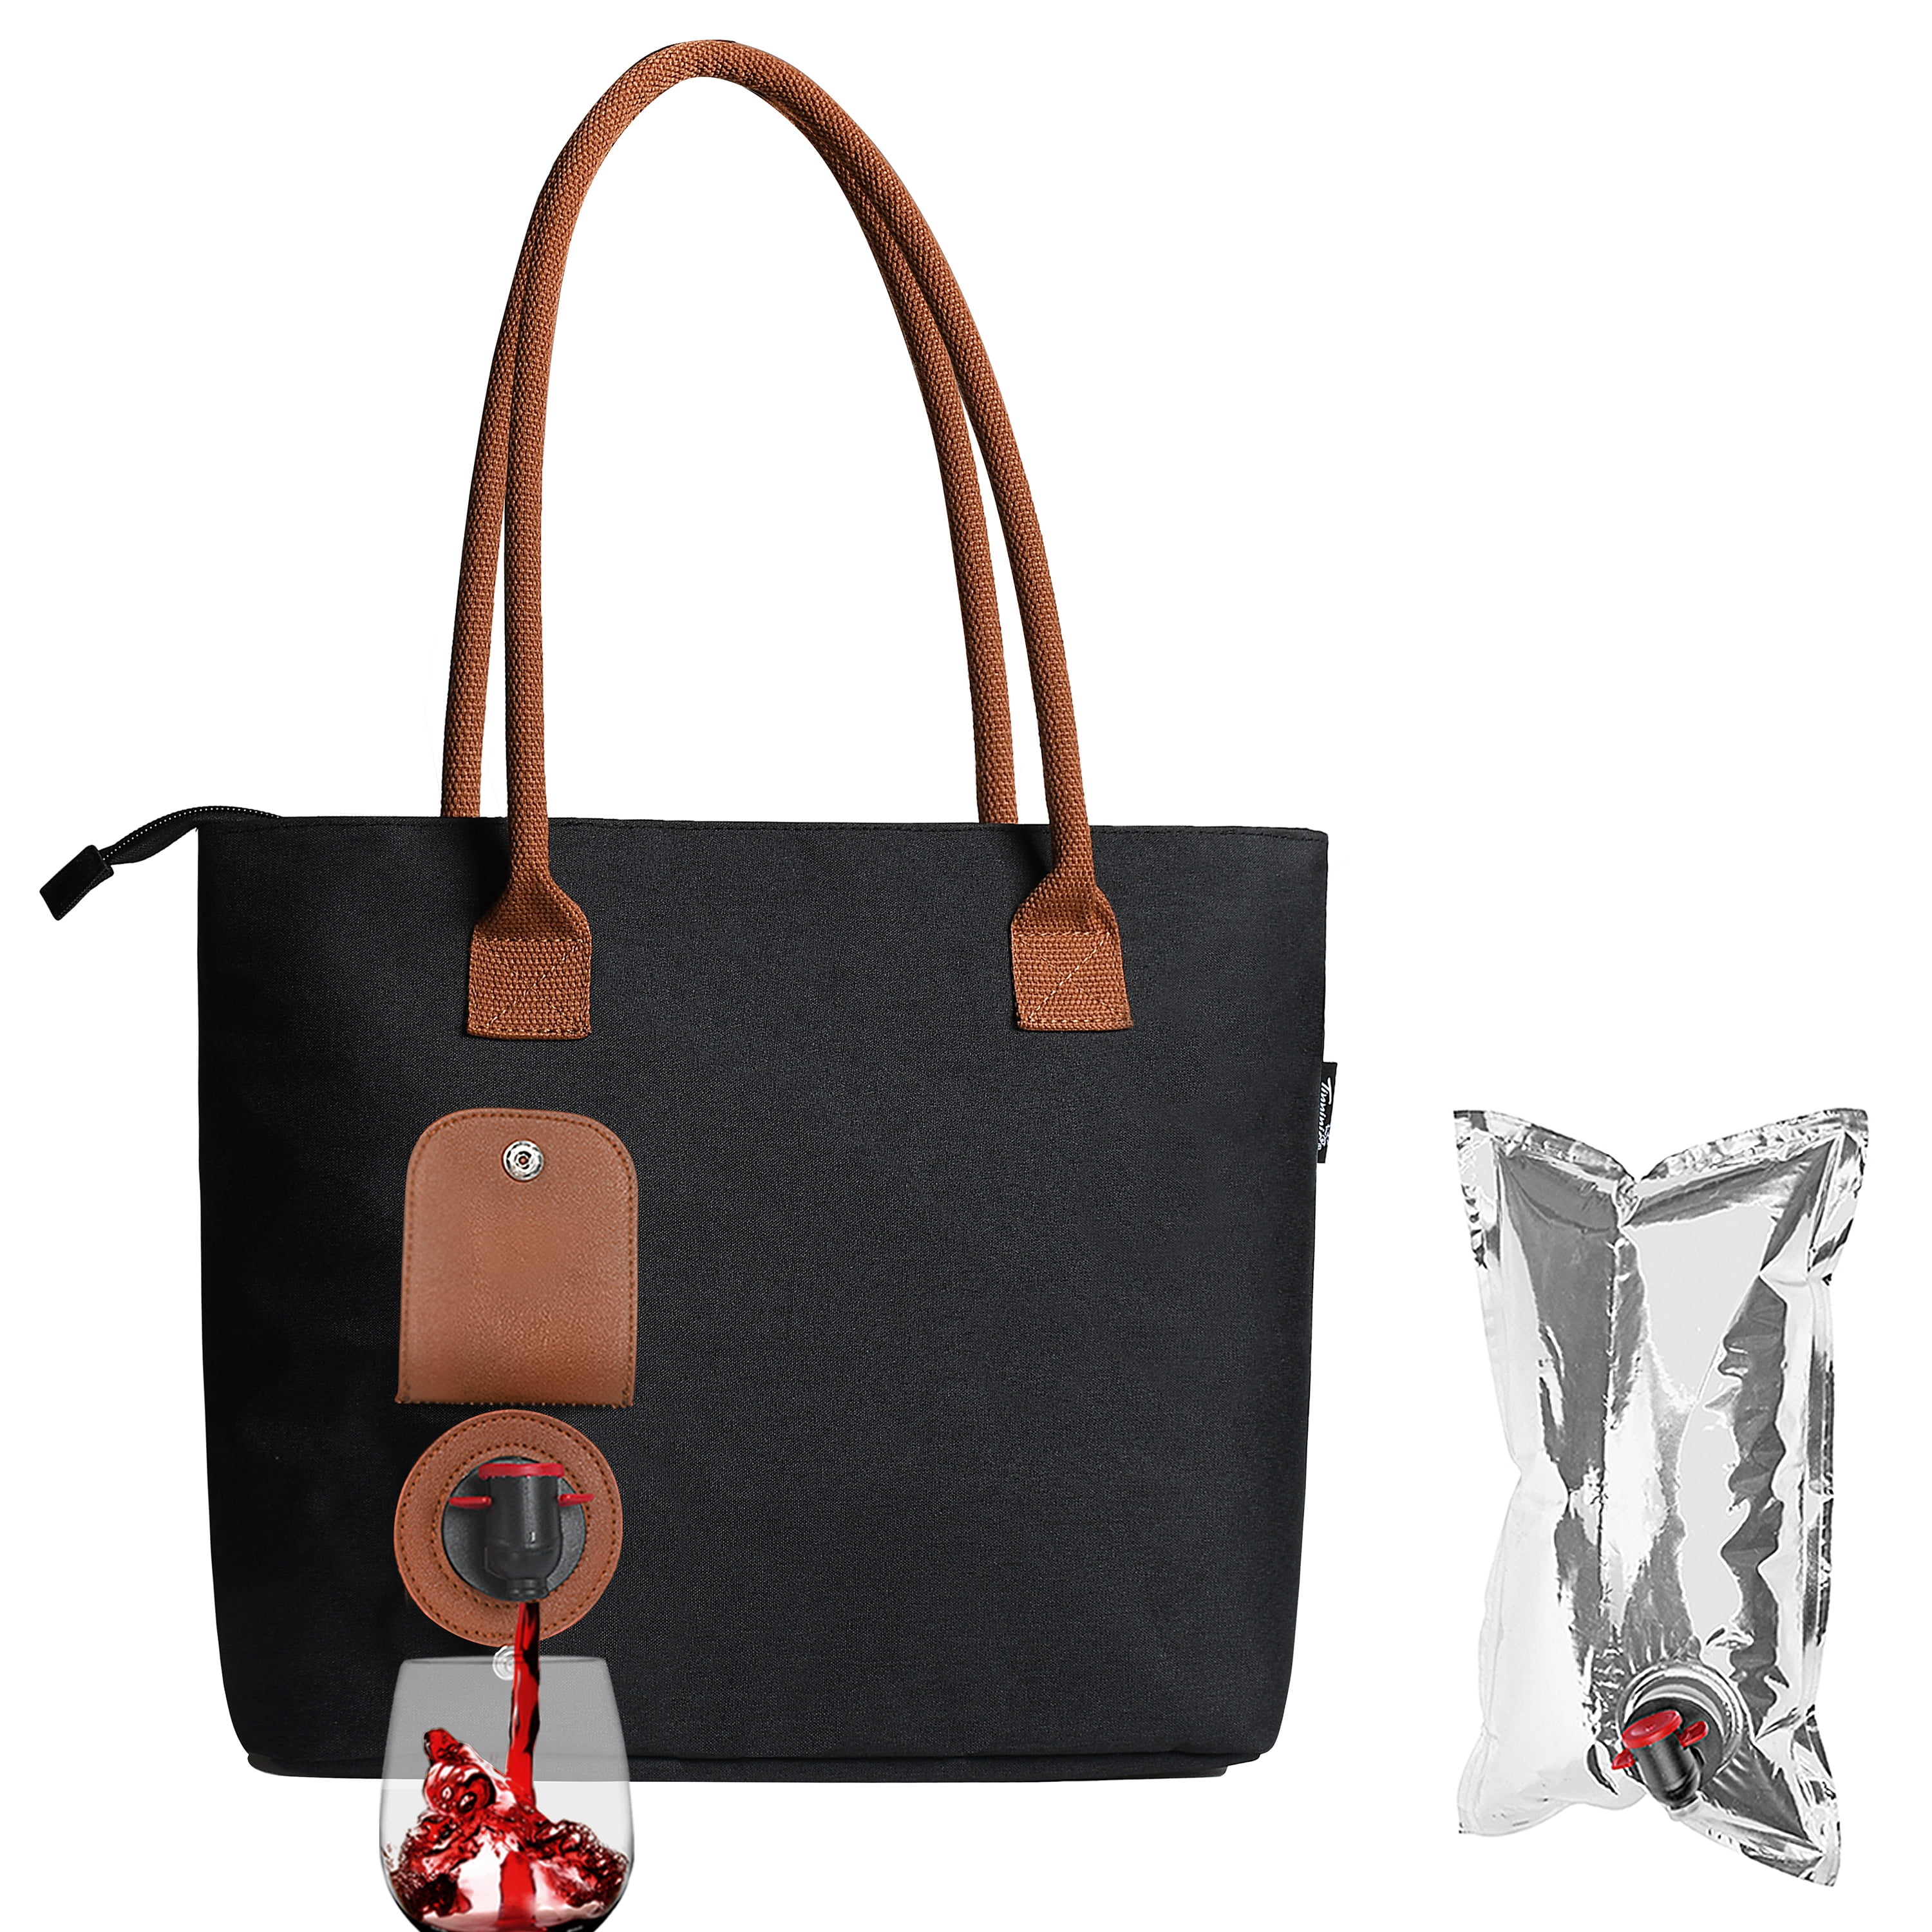 Amazon.com: PortoVino Tote Beach Bag - Canvas Wine Purse with Hidden Spout  and Dispenser Flask for Wine Lovers that Holds and Pours 2 bottles of Wine!  Traveling, Concerts, Bachelorette Party - Seabreeze: